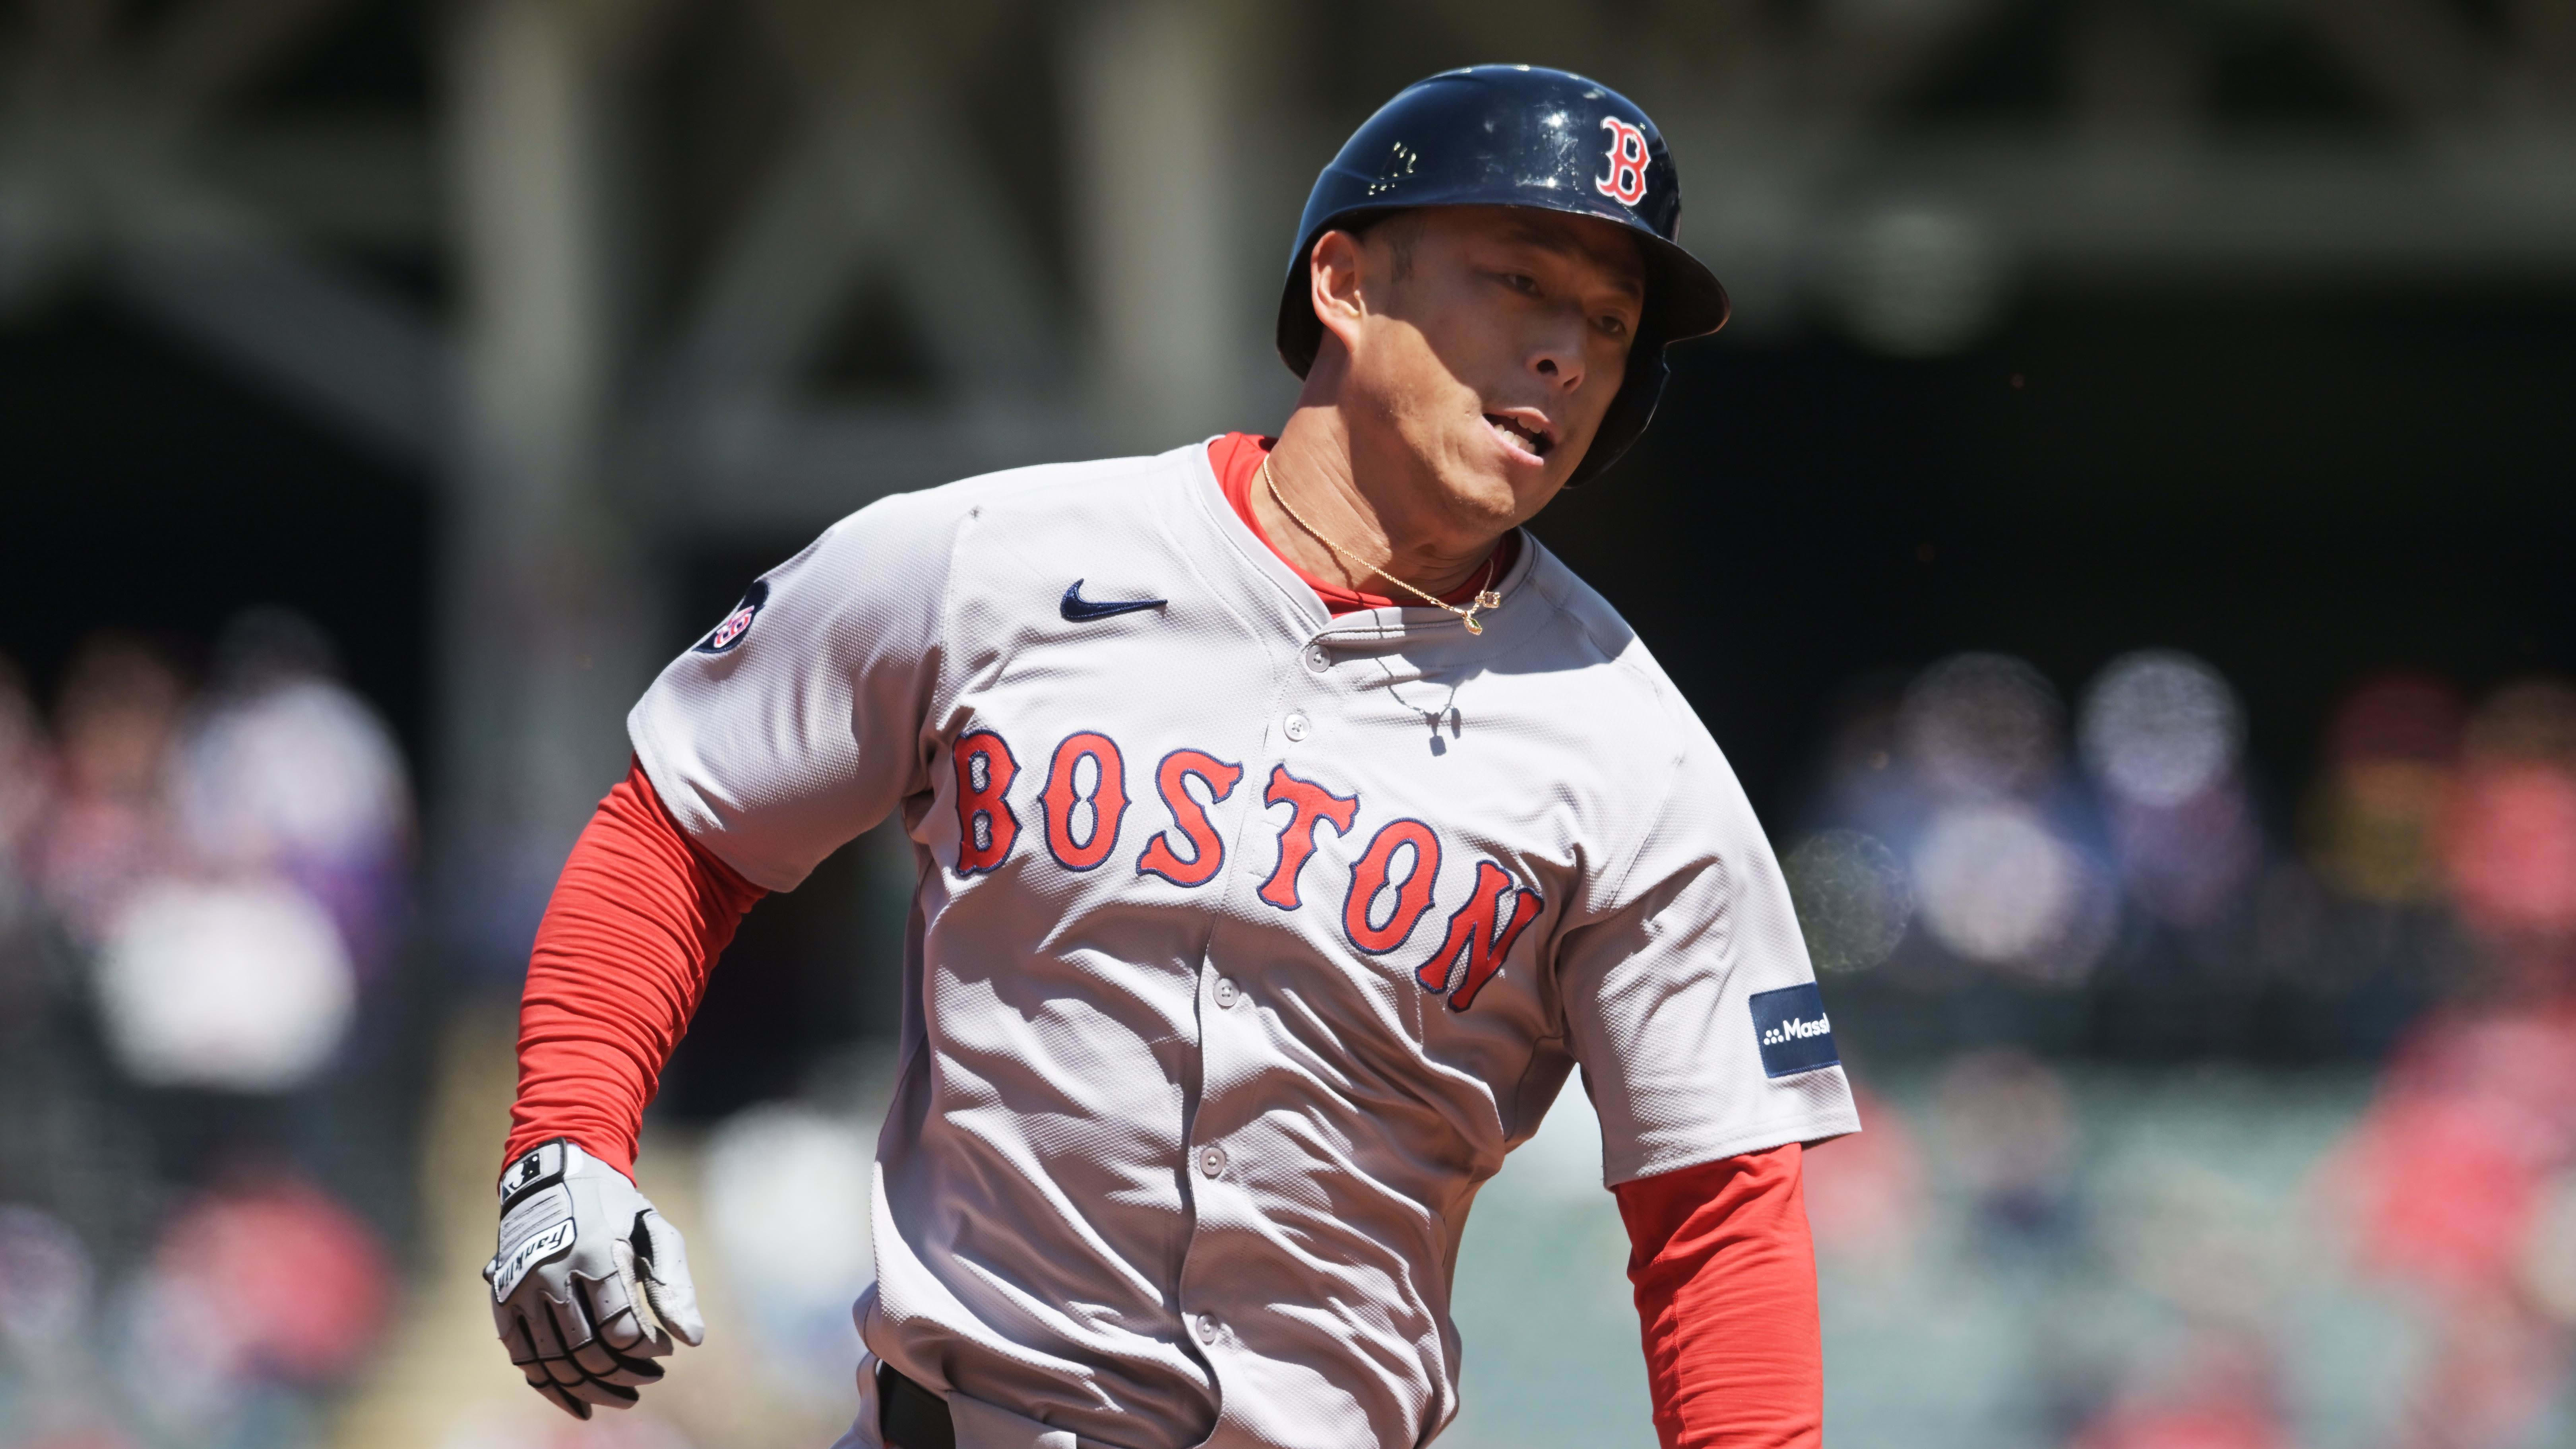 Boston Red Sox Outfielder Rob Refsnyder Leaves Game Early With Hamstring Injury